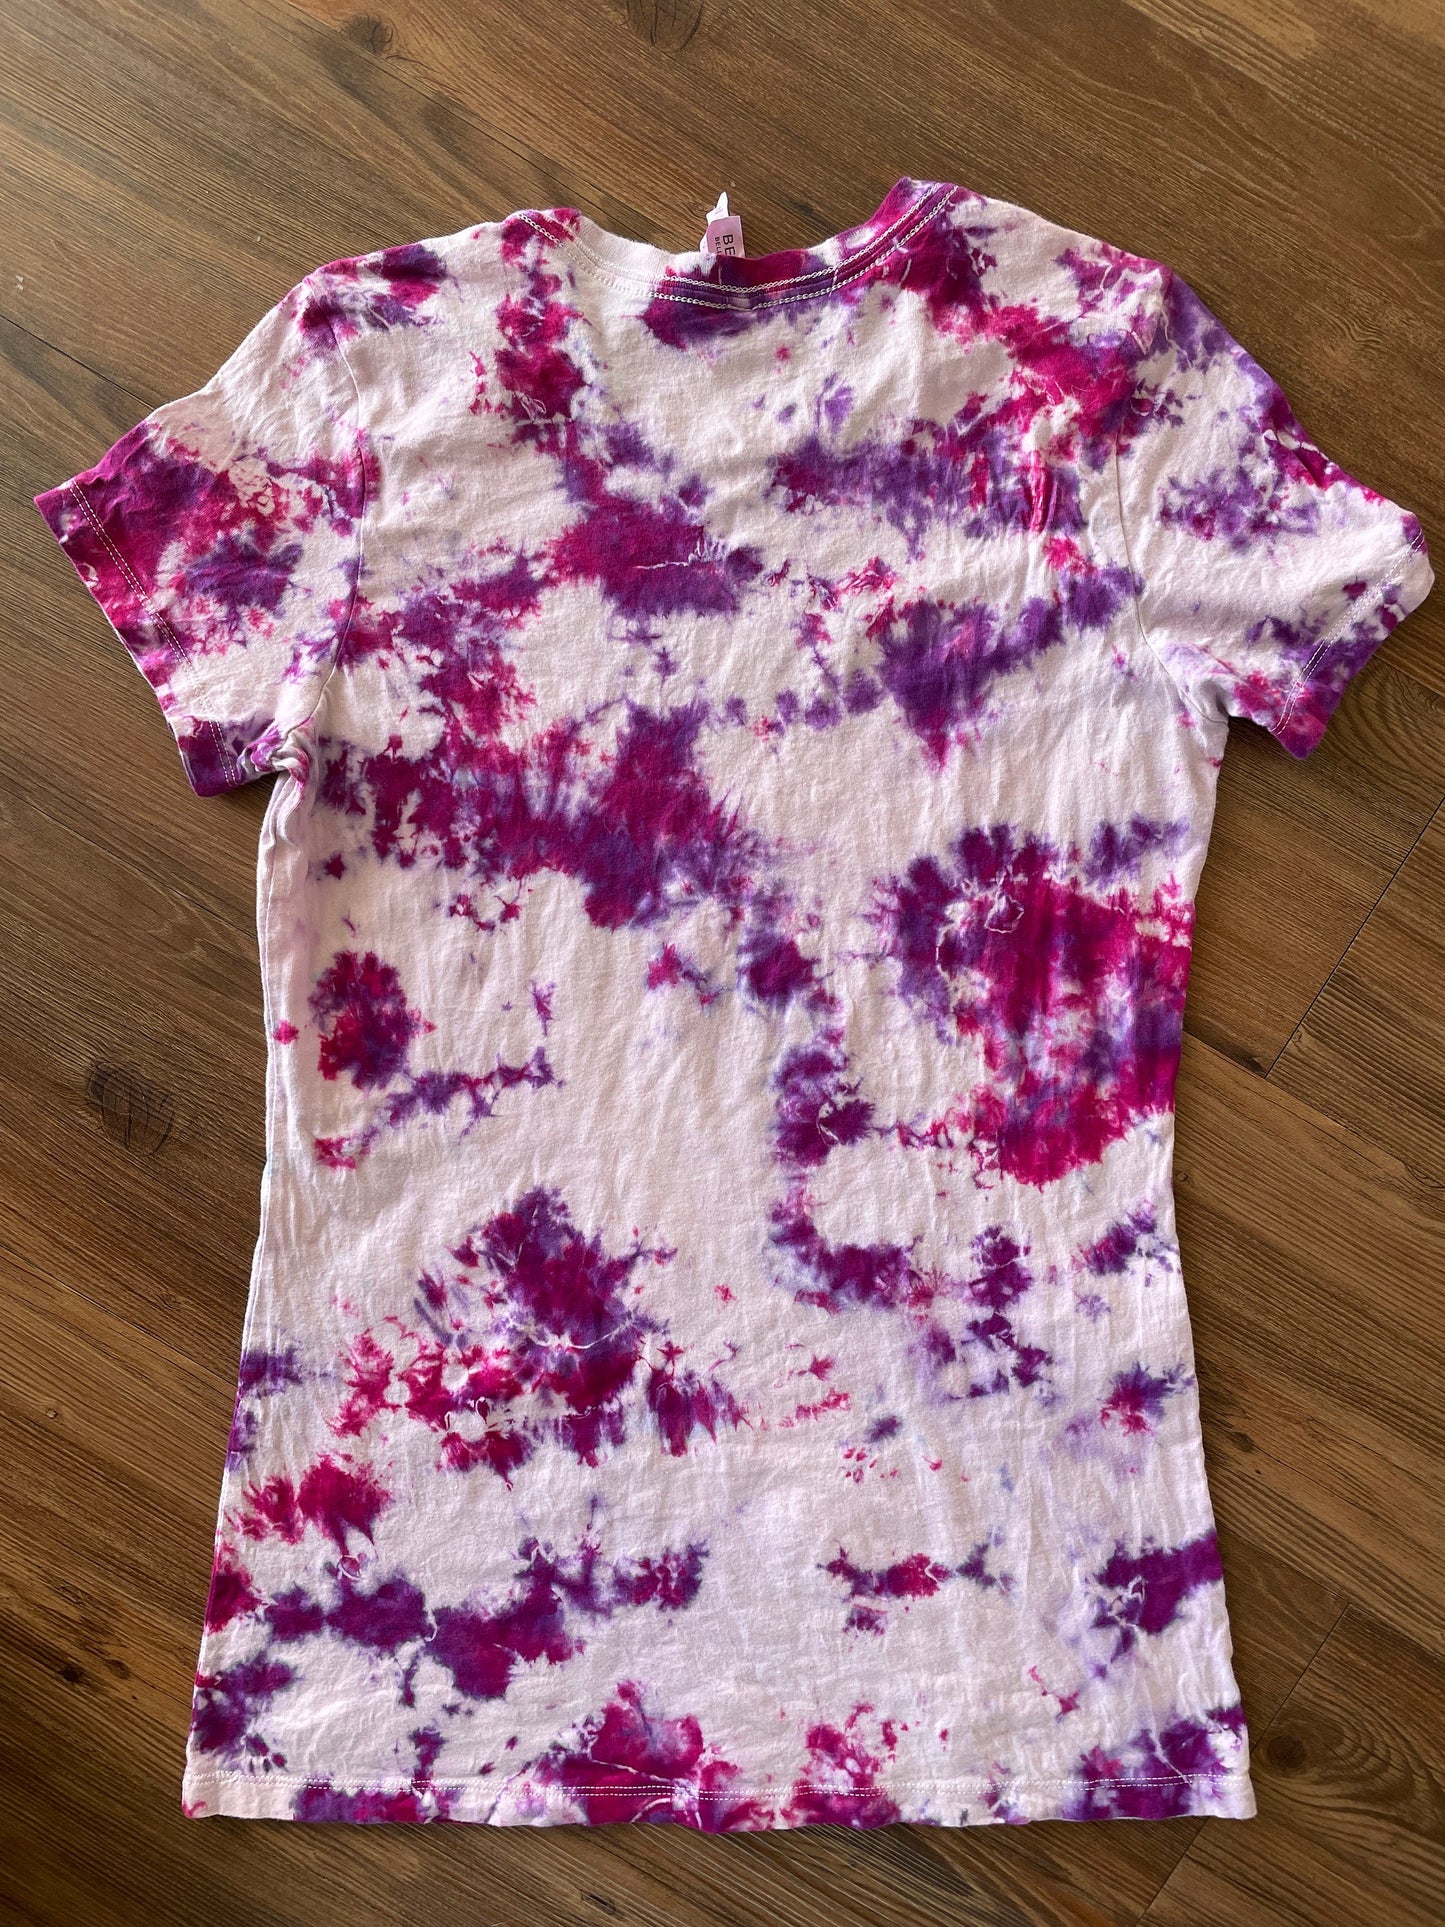 No More 1 in 4 Handmade Tie Dye t-shirt | Sexual Abuse Awareness Short Sleeve Top Women’s Medium | Sustainably Made